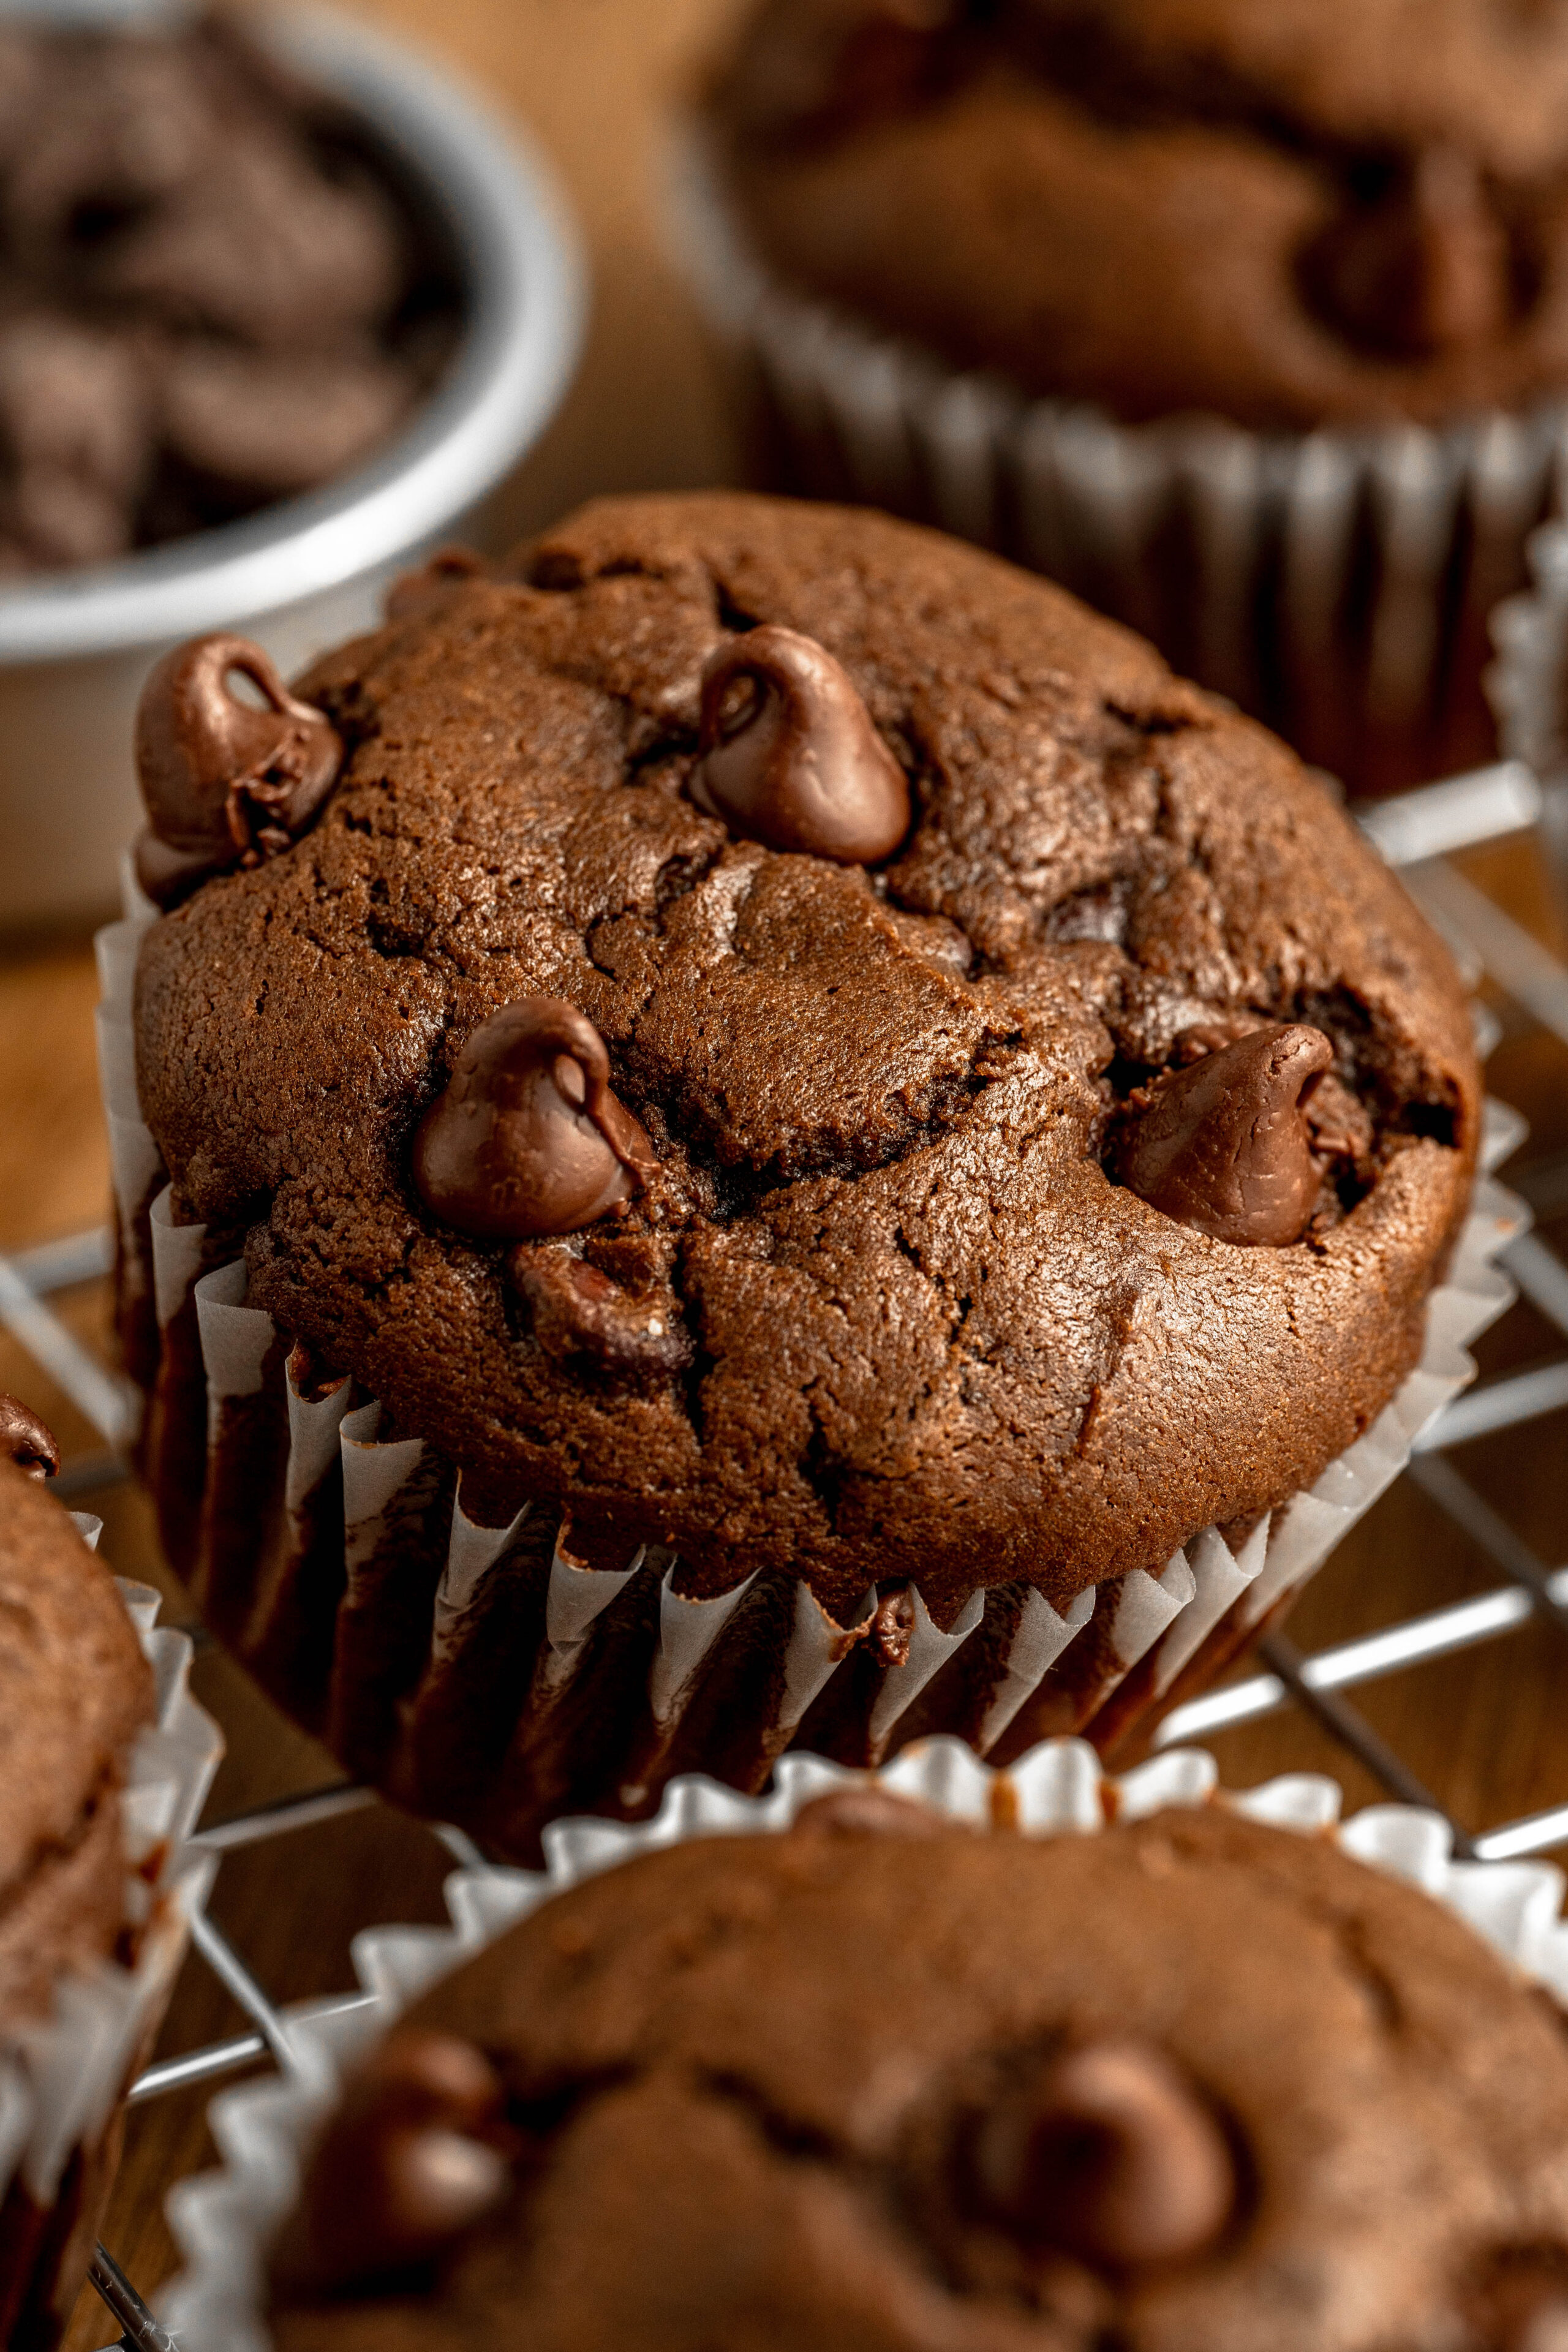 a chocolate muffin with chocolate chips throughout.